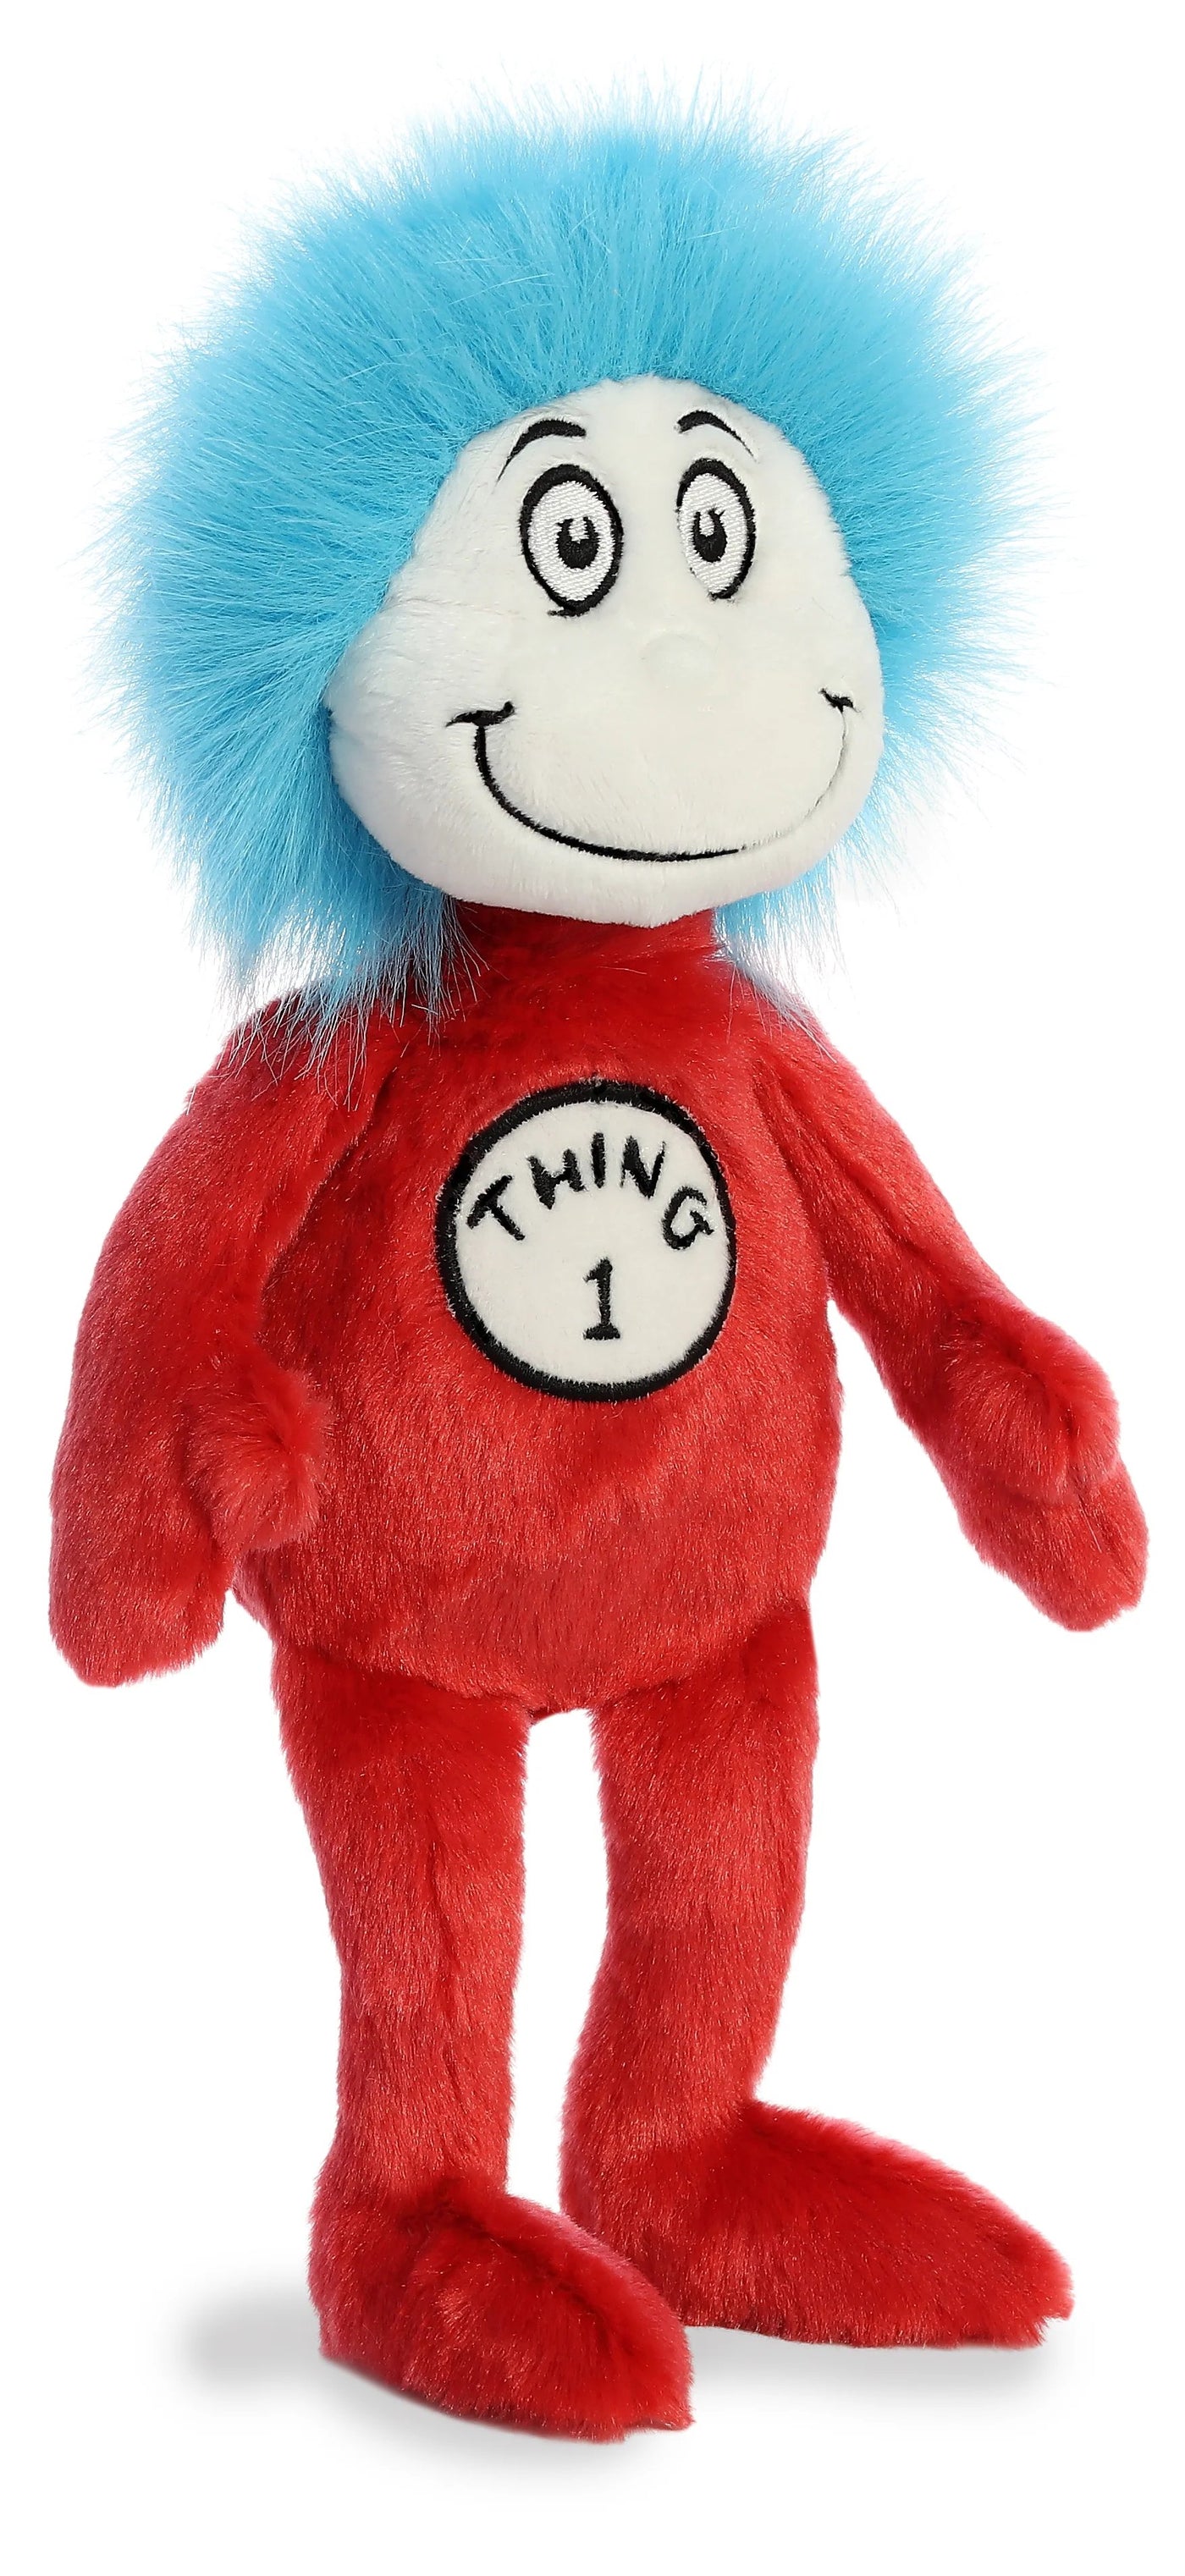 Aurora Dr. Seuss The Cat in the Hat 12" Thing 1 Plush Toy - Side View